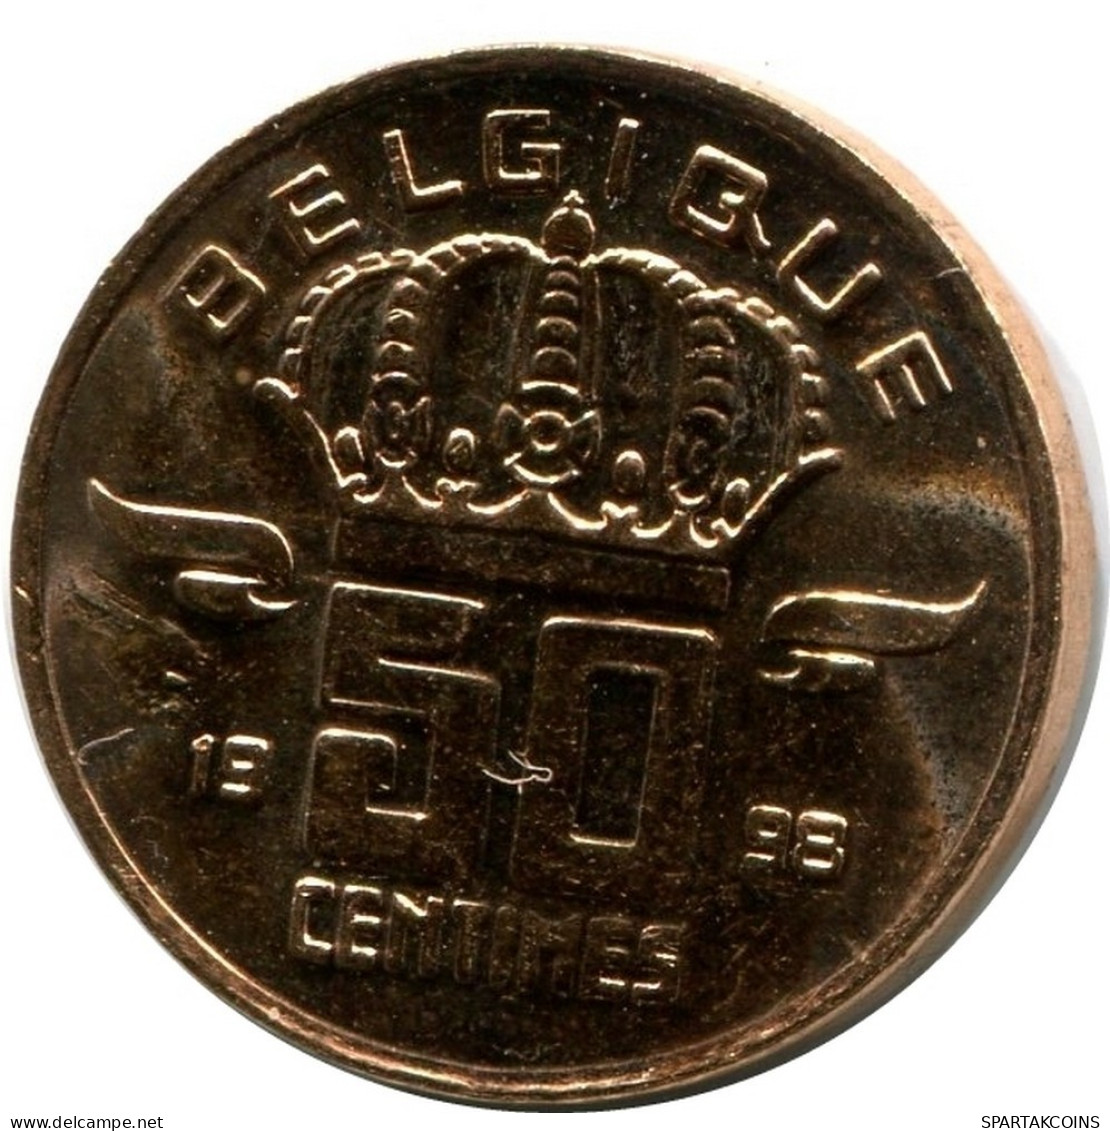 50 CENTIMES 1998 FRENCH Text BELGIUM Coin UNC #M10014.U.A - 50 Cents